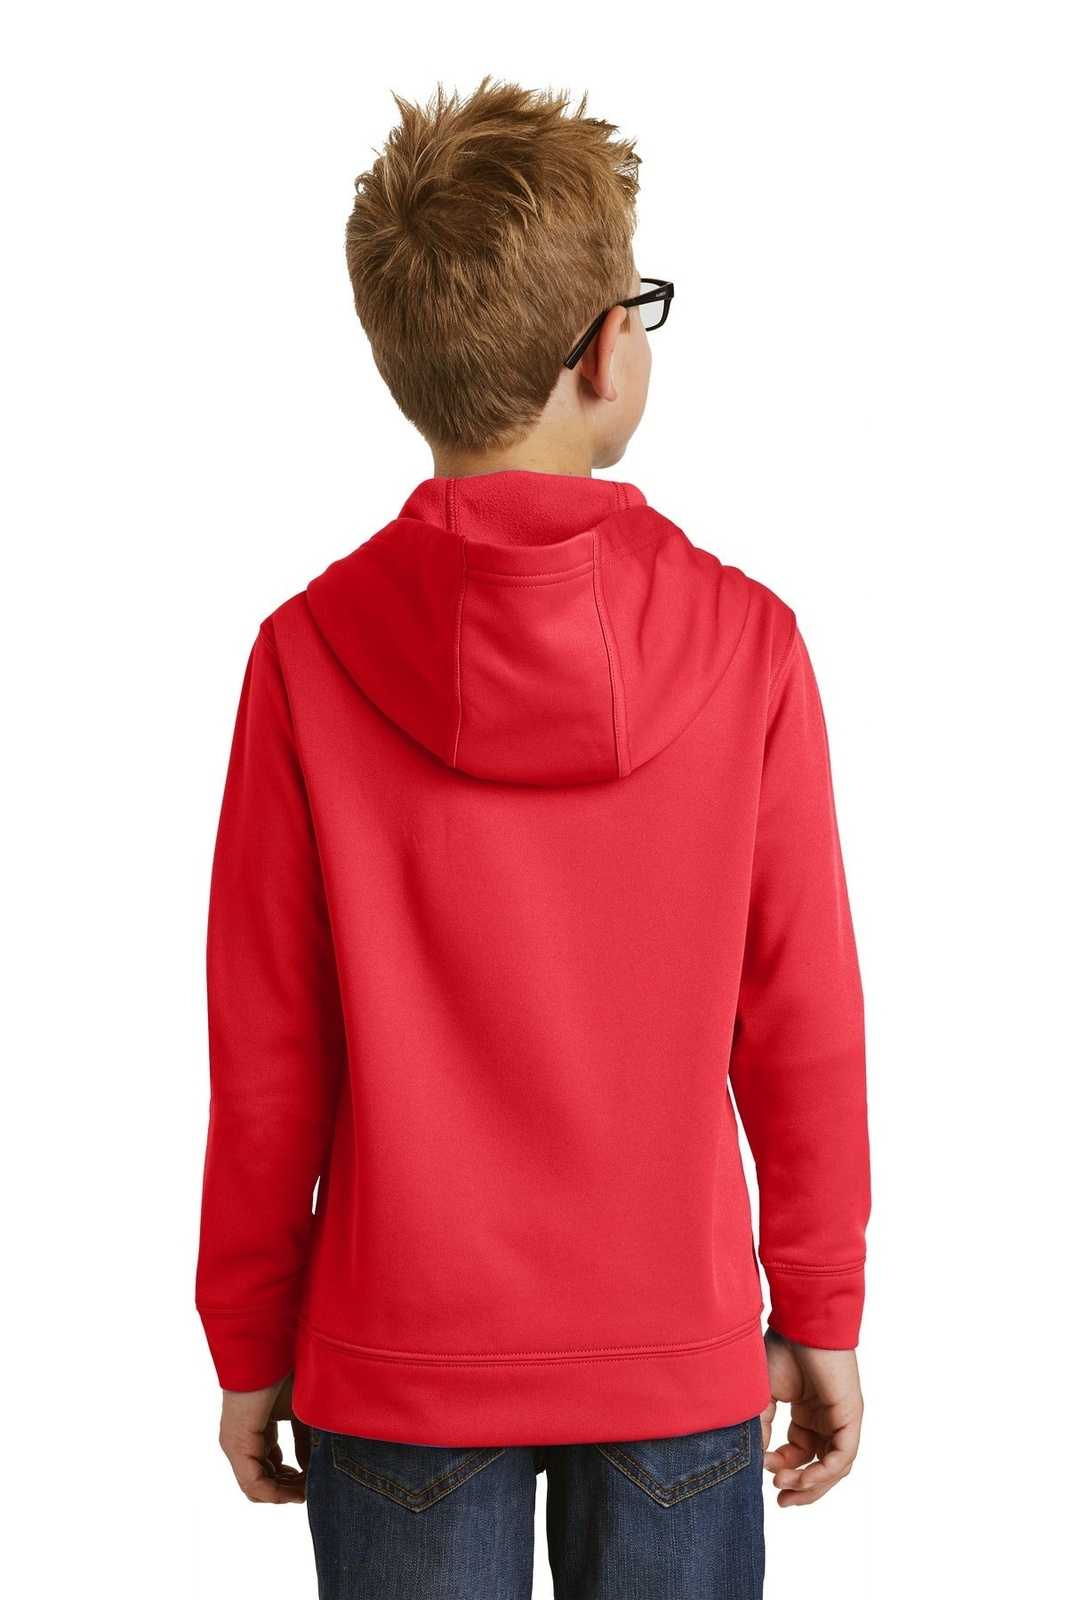 Port & Company PC590YH Youth Performance Fleece Pullover Hooded Sweatshirt - Red - HIT a Double - 1